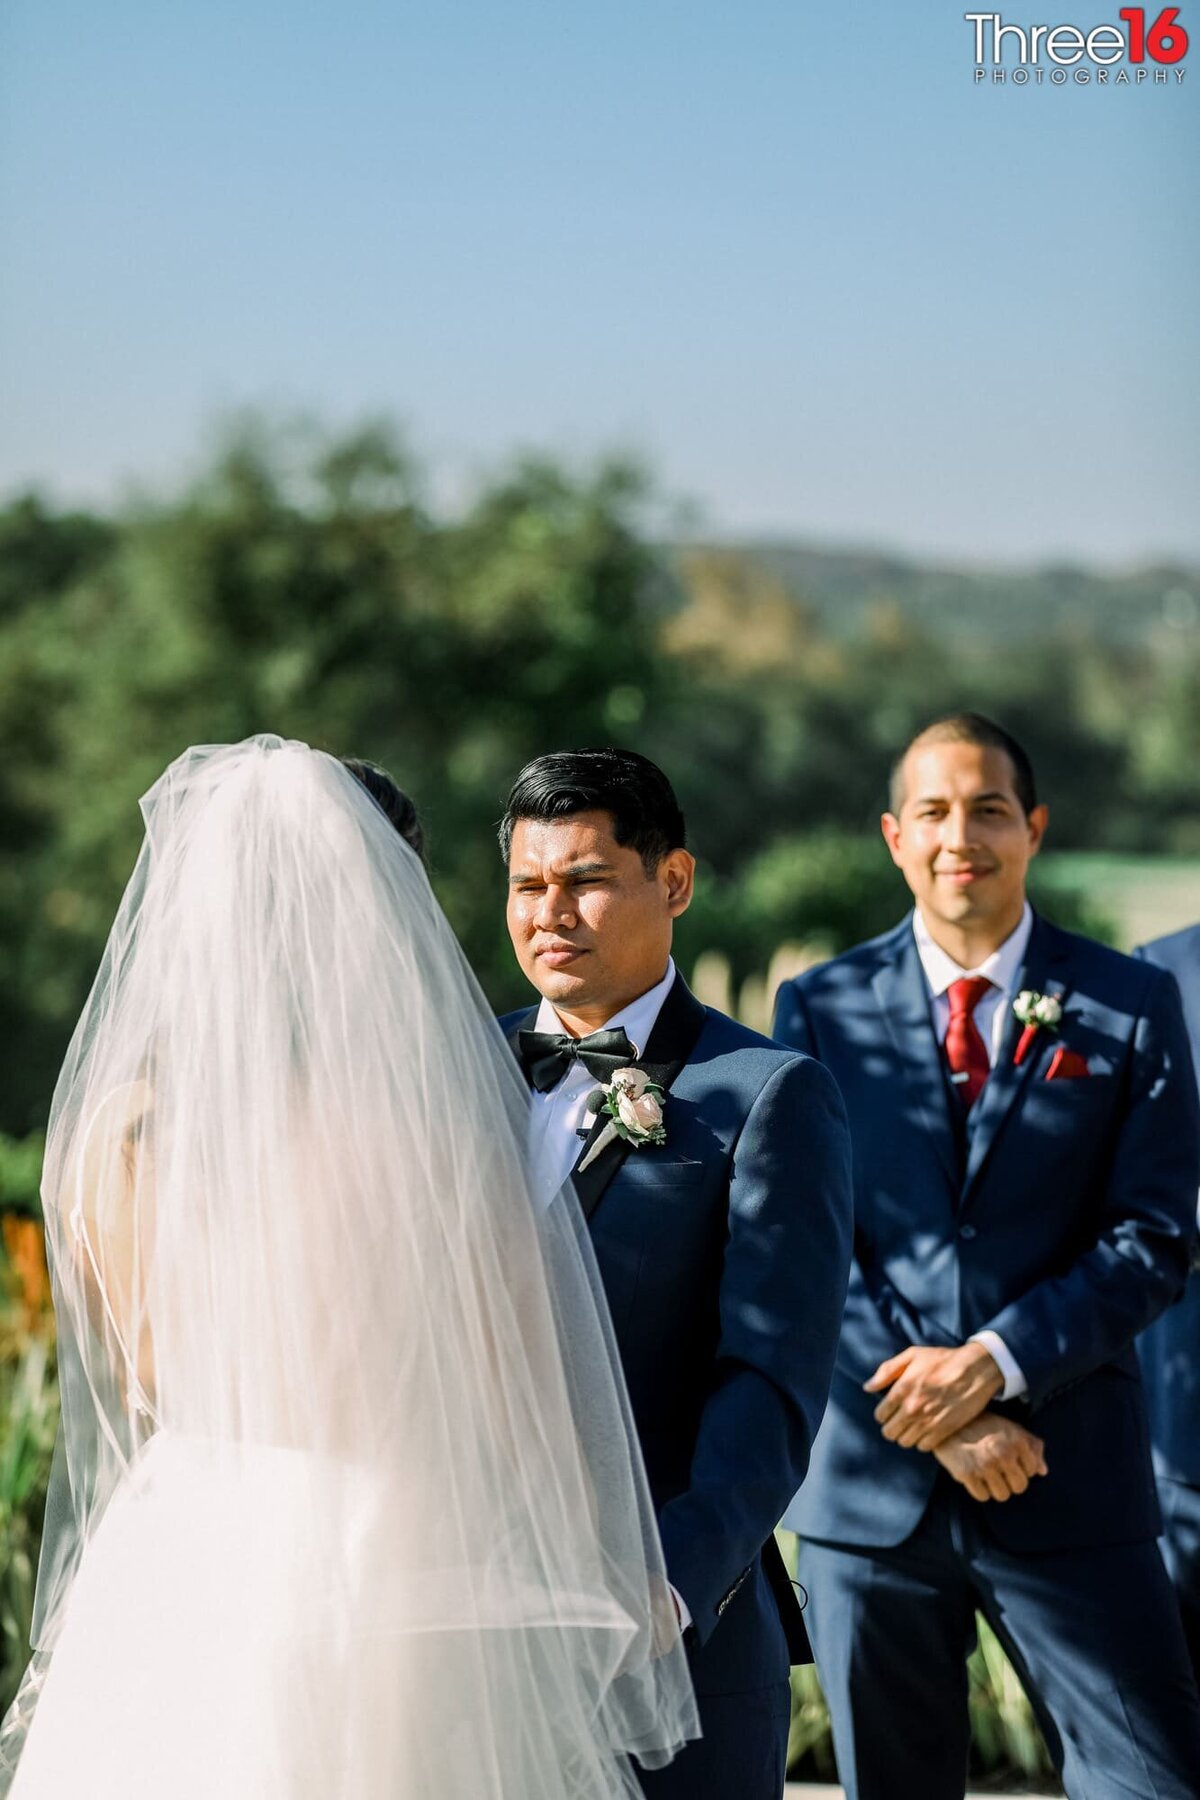 Groom stares at his Bride as she takes her vows to him